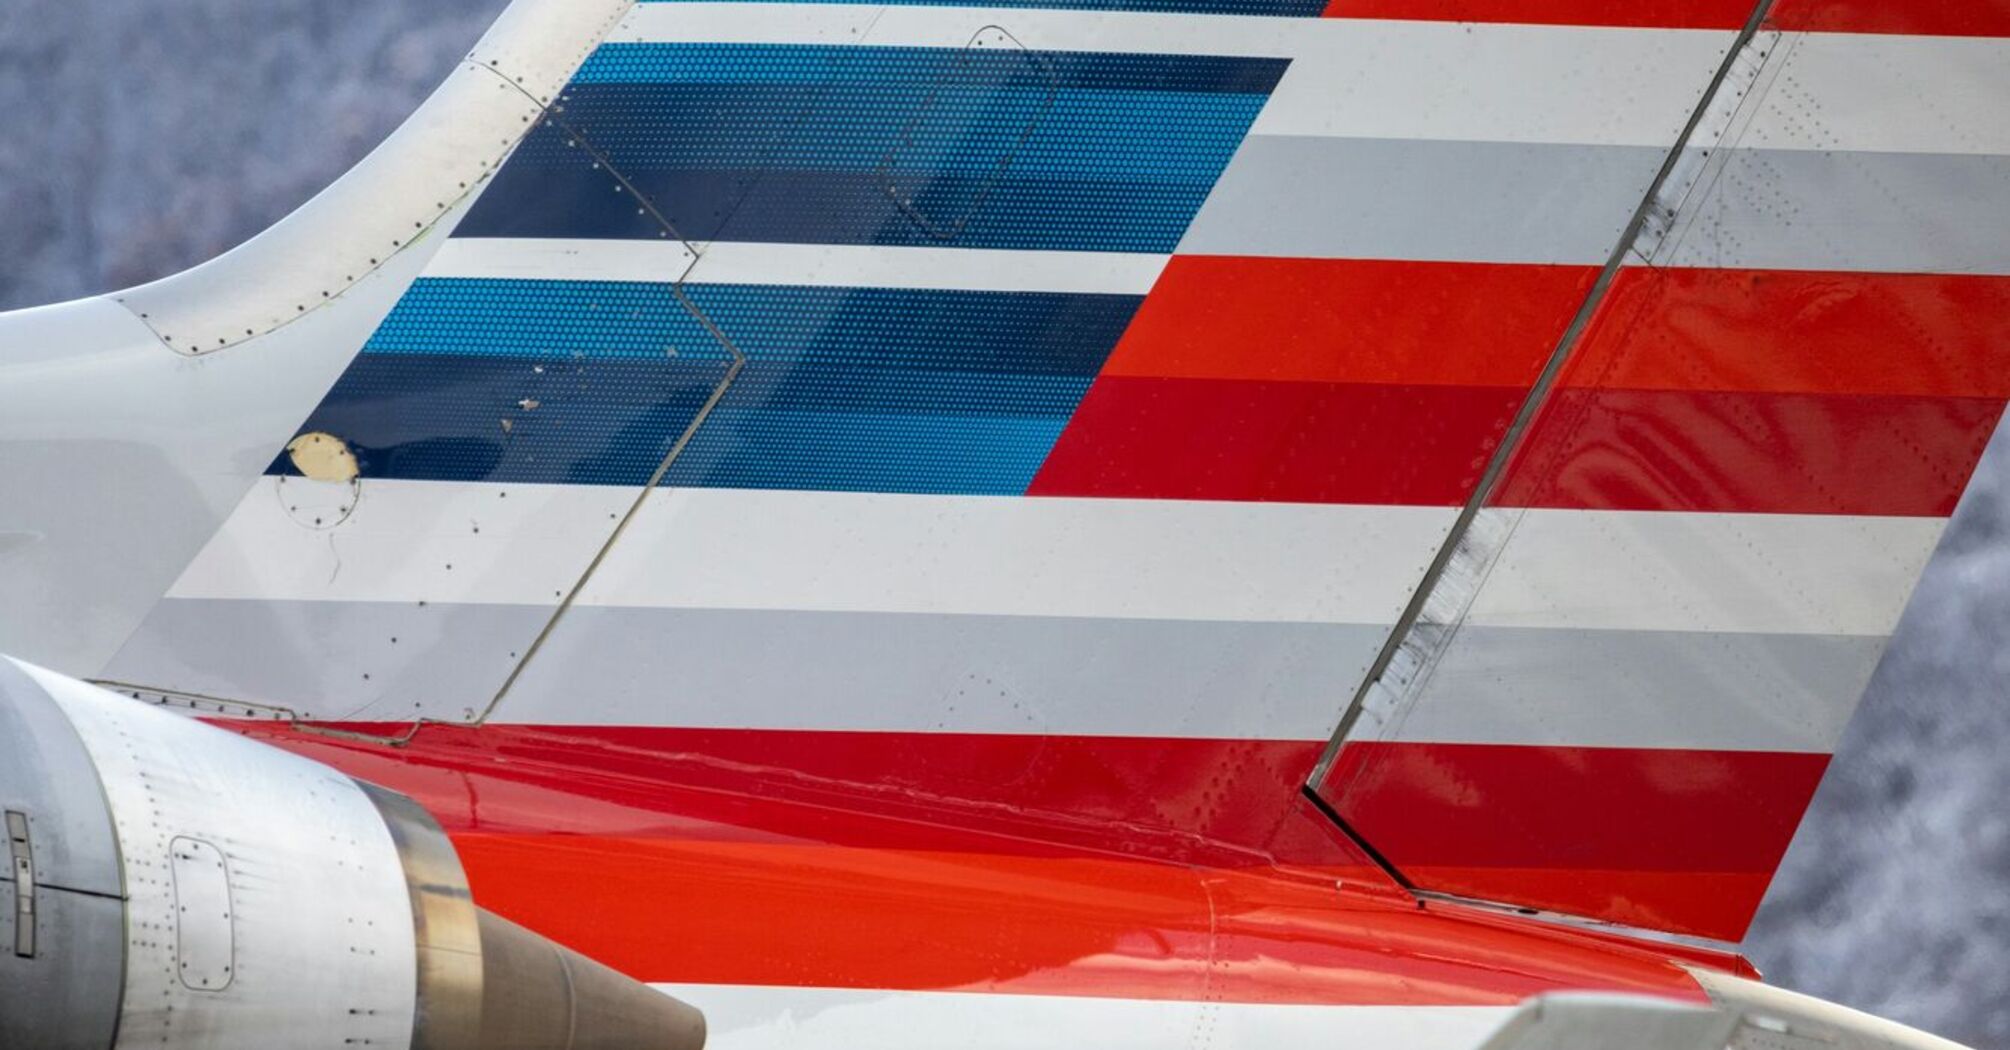 Tail of an American Airlines plane on the runway